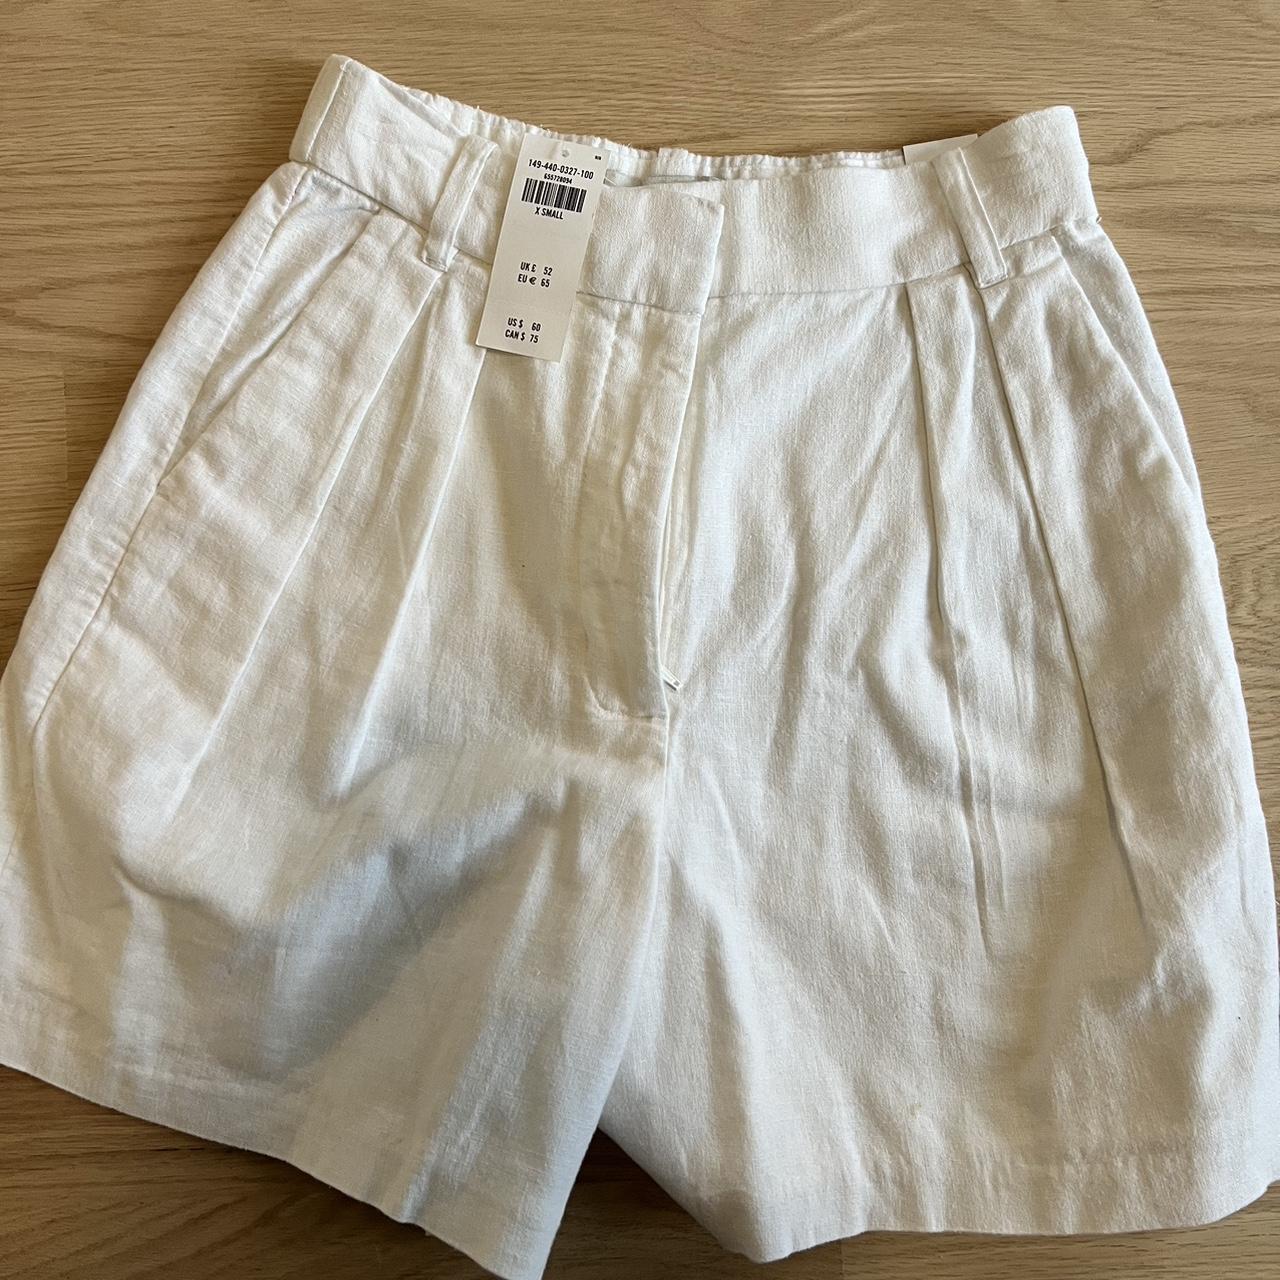 Abercrombie white linen pants, new with tags - Depop